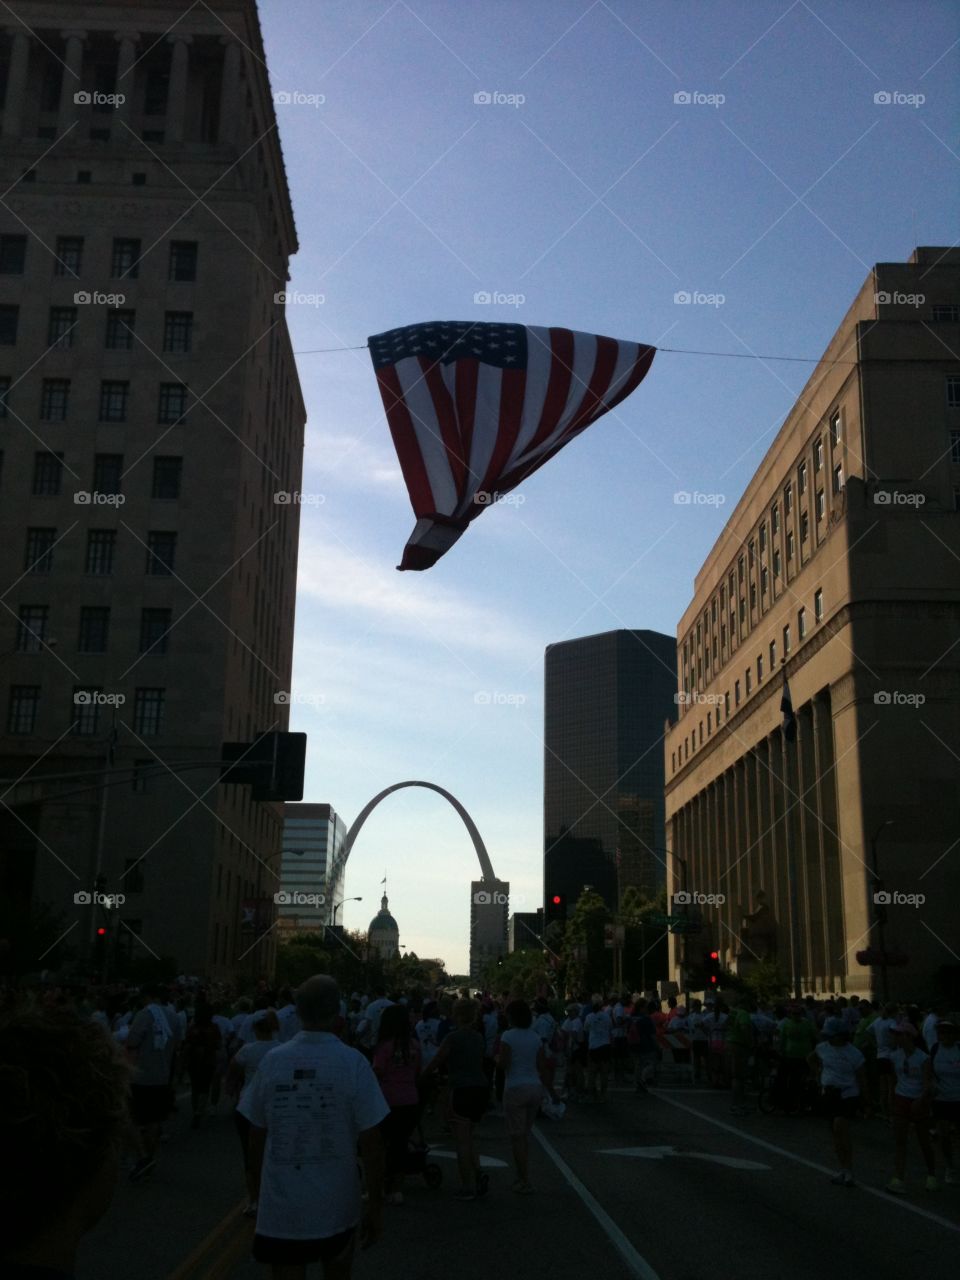 Flag Over the Streets of St. Louis